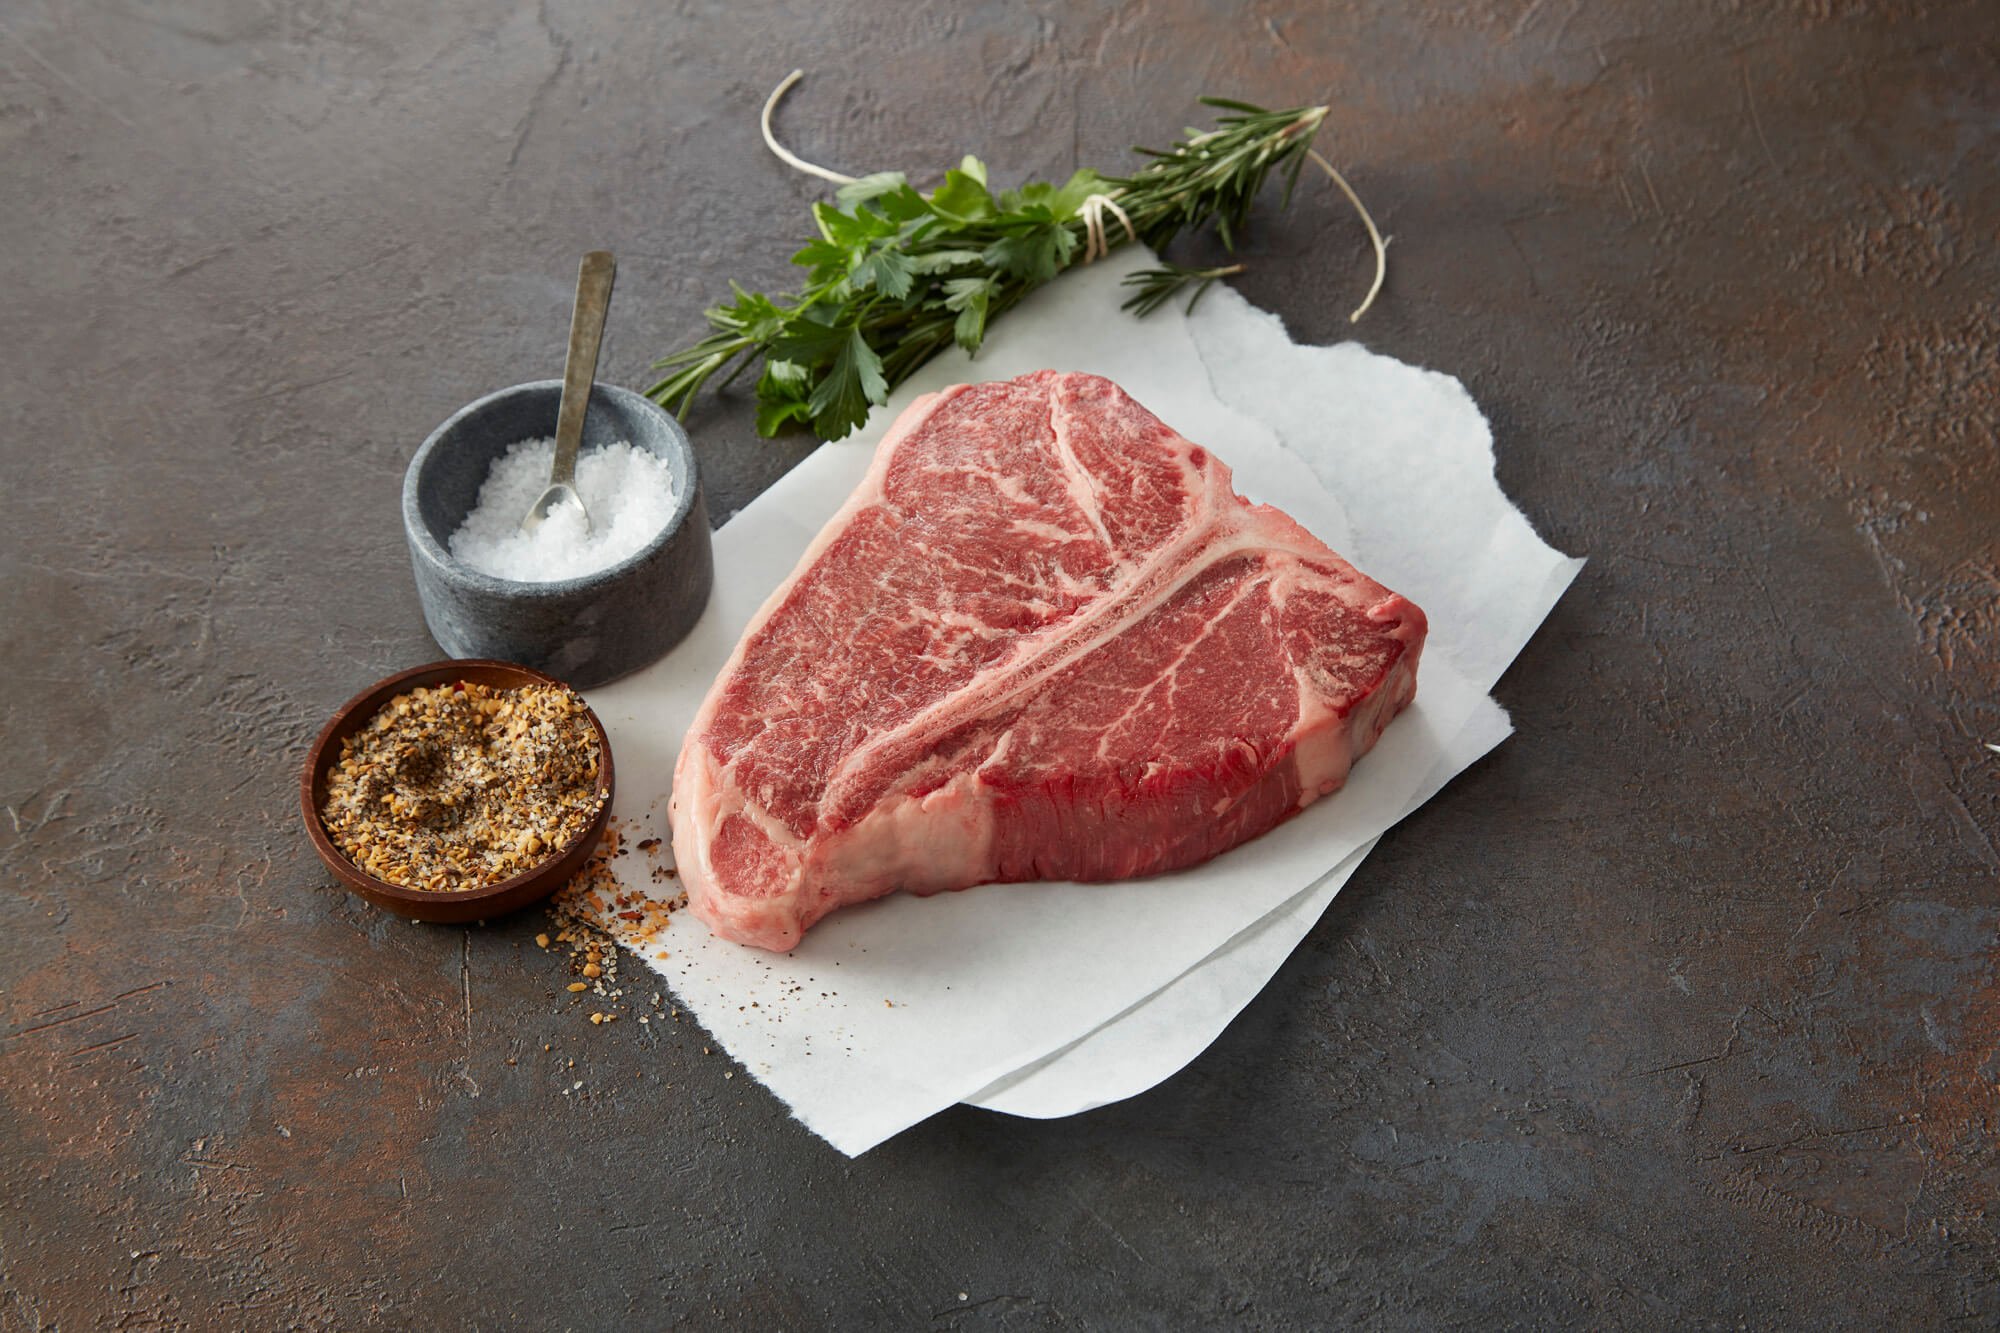 How to Cook a Frozen Steak (Without Thawing It) - Steak ...